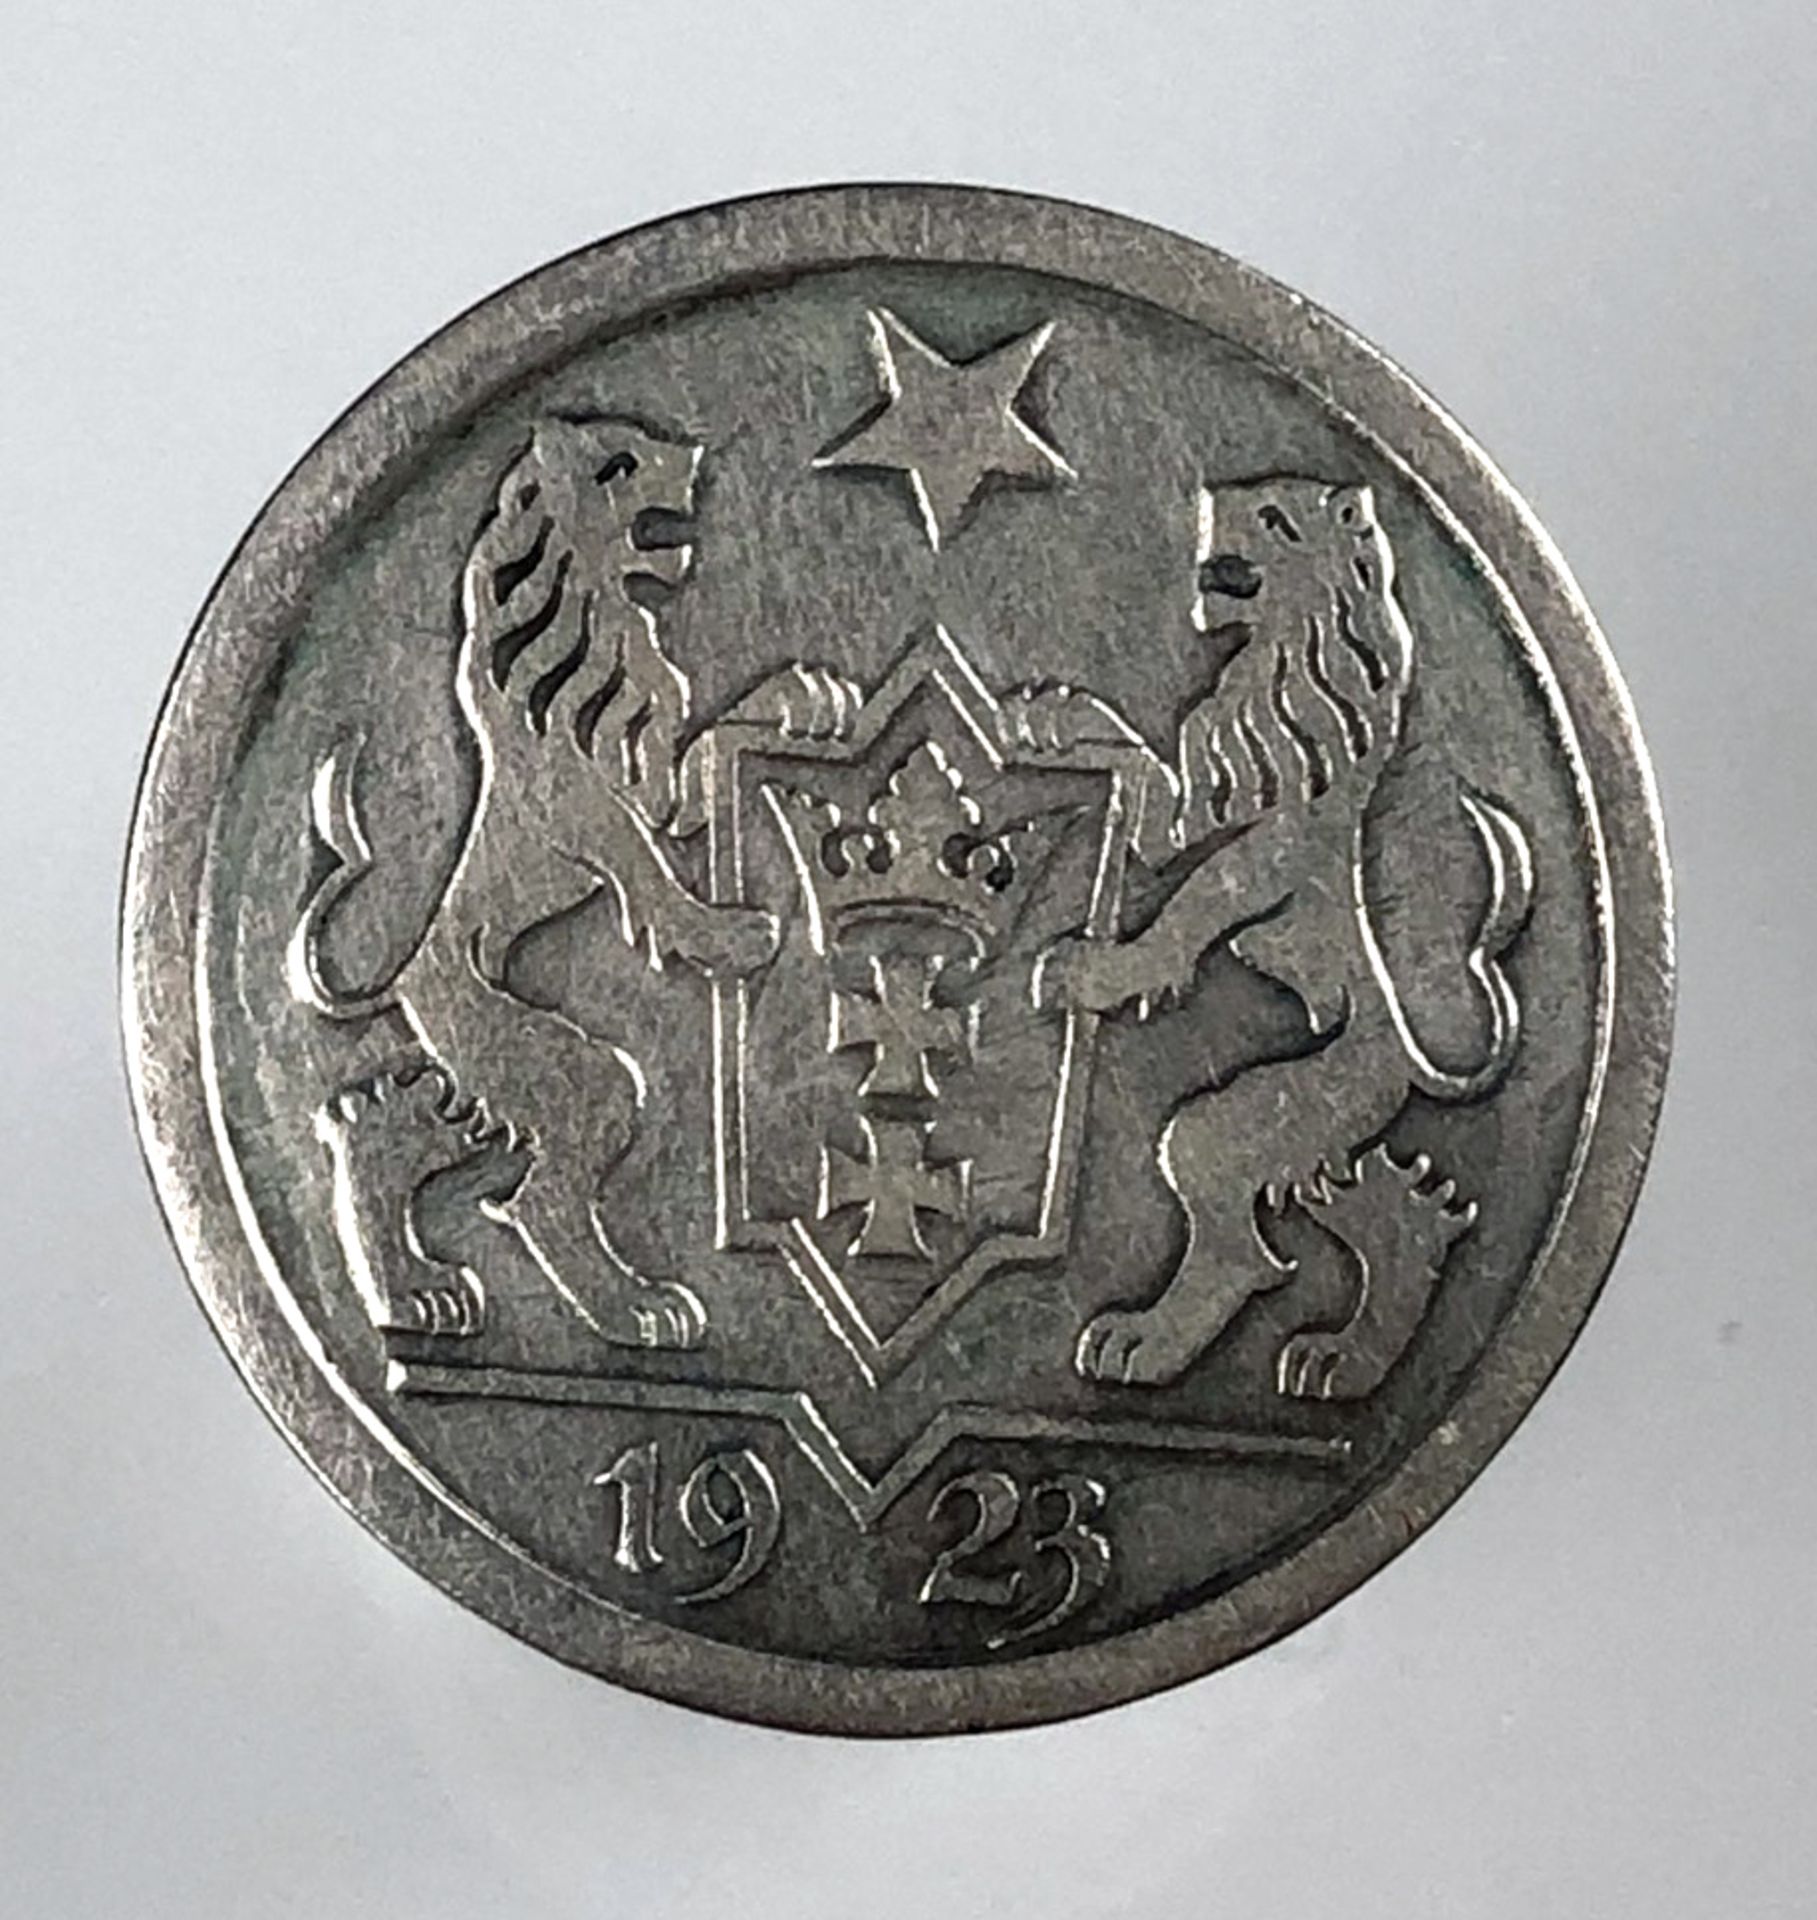 Danzig. 2 Gulden 1923 (J. D8).9,8 Gramm.Danzig. 2 Gulden 1923 (J. D8).9,8 Gramm. - Image 2 of 5